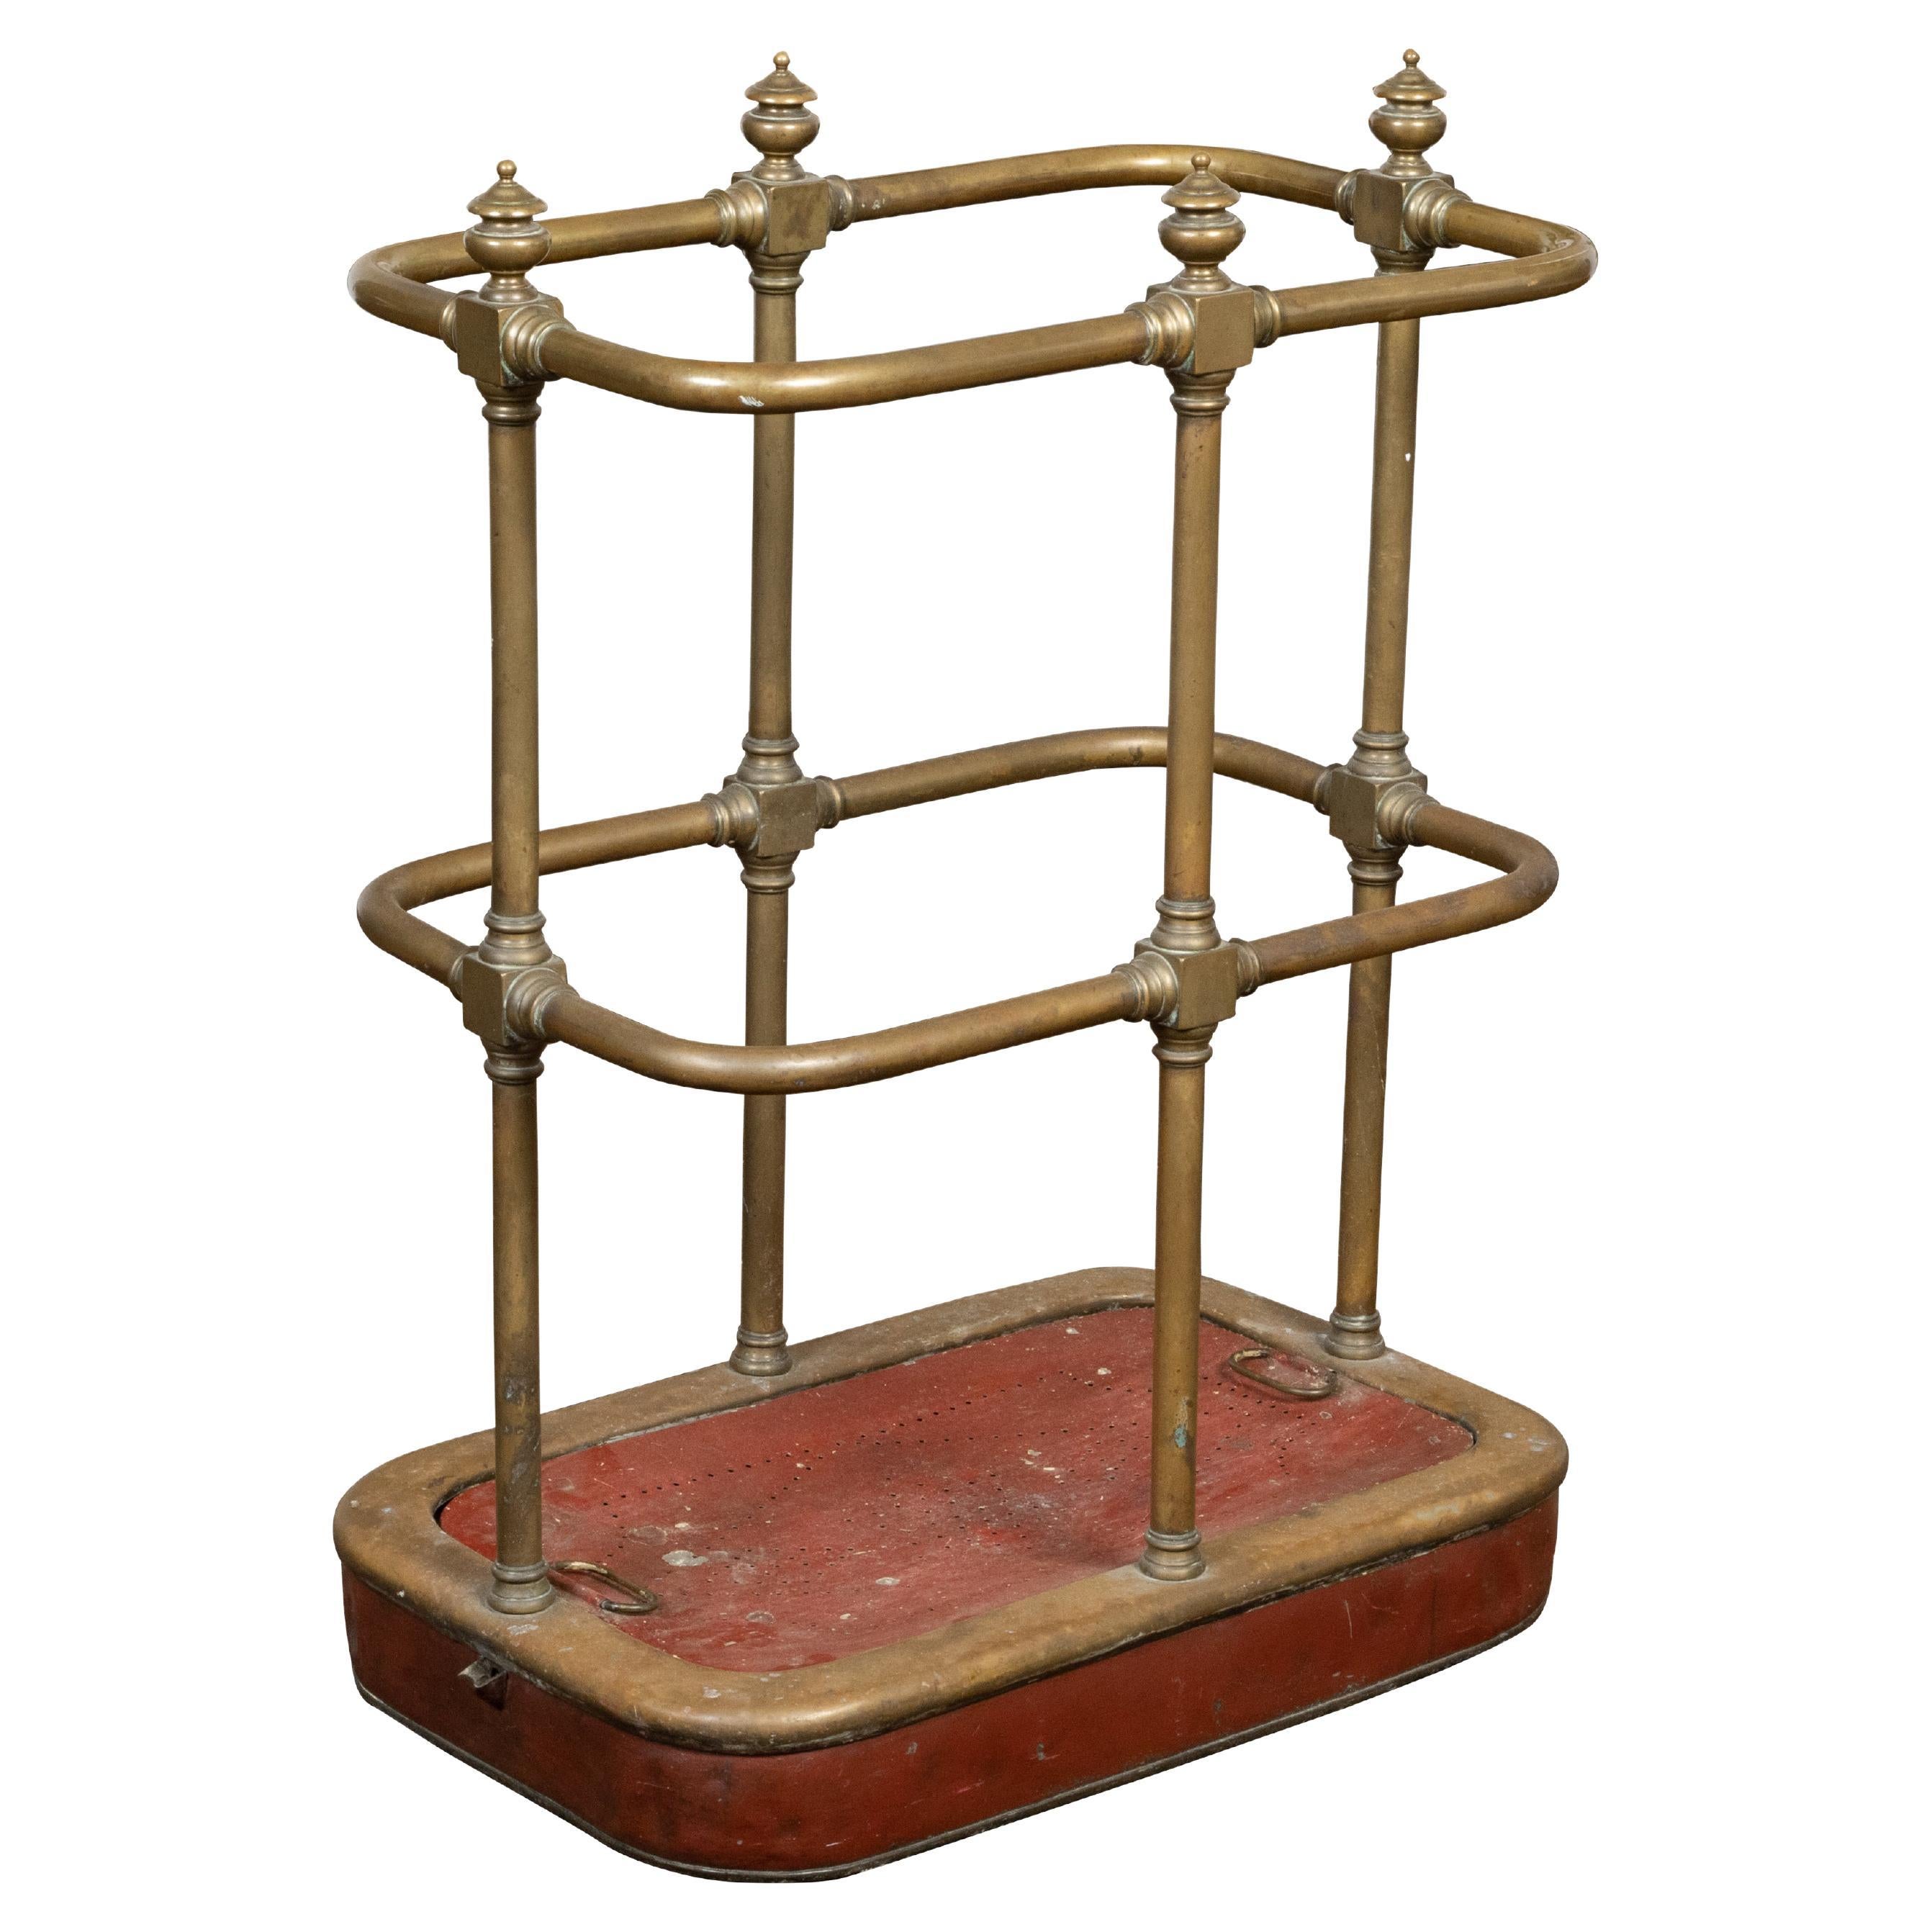 English Victorian Period 19th Century Brass Umbrella Stand with Removable Plaque For Sale